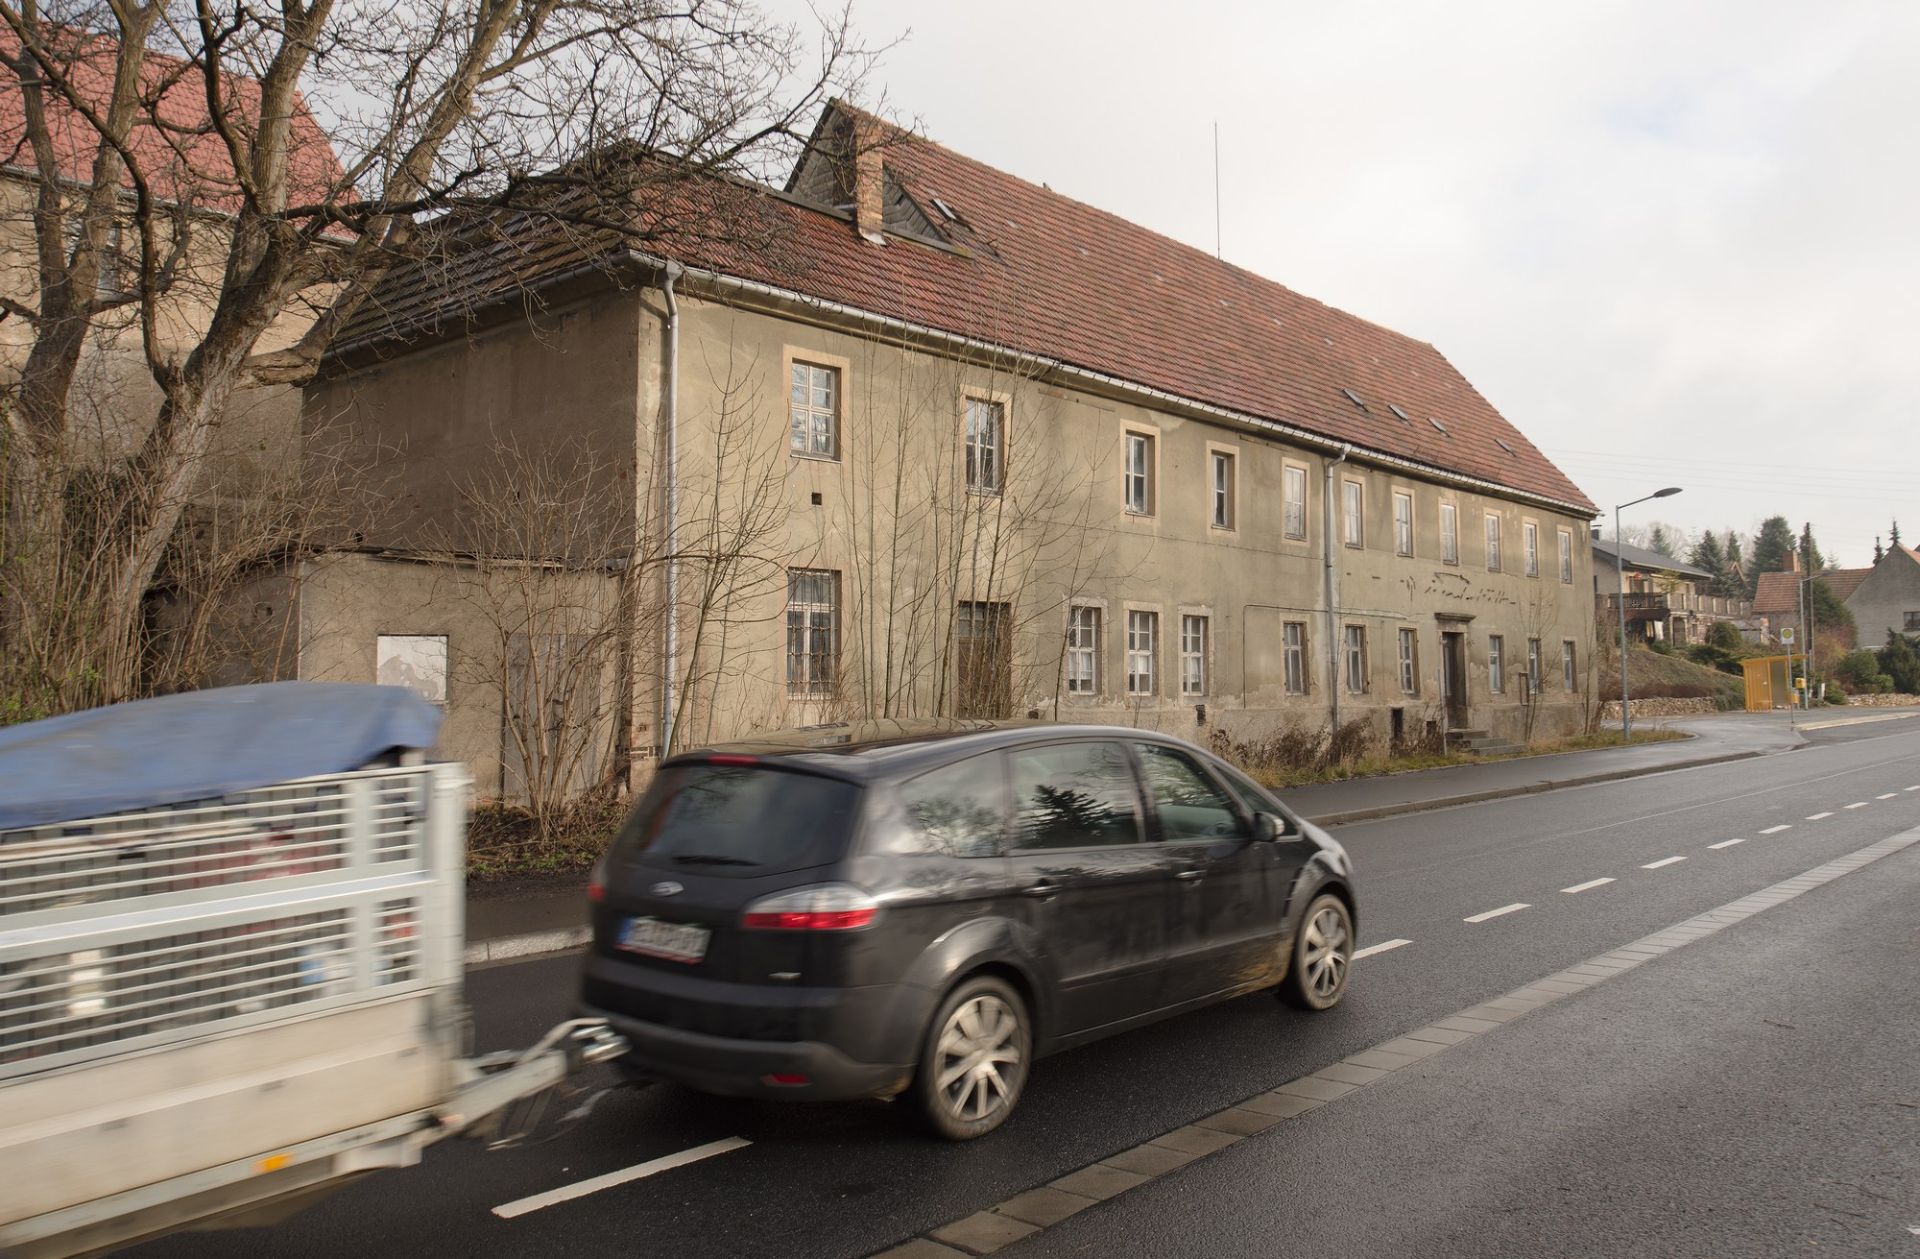 LARGE FORMER GUEST HOUSE IN NOSSEN, GERMANY - Image 47 of 47